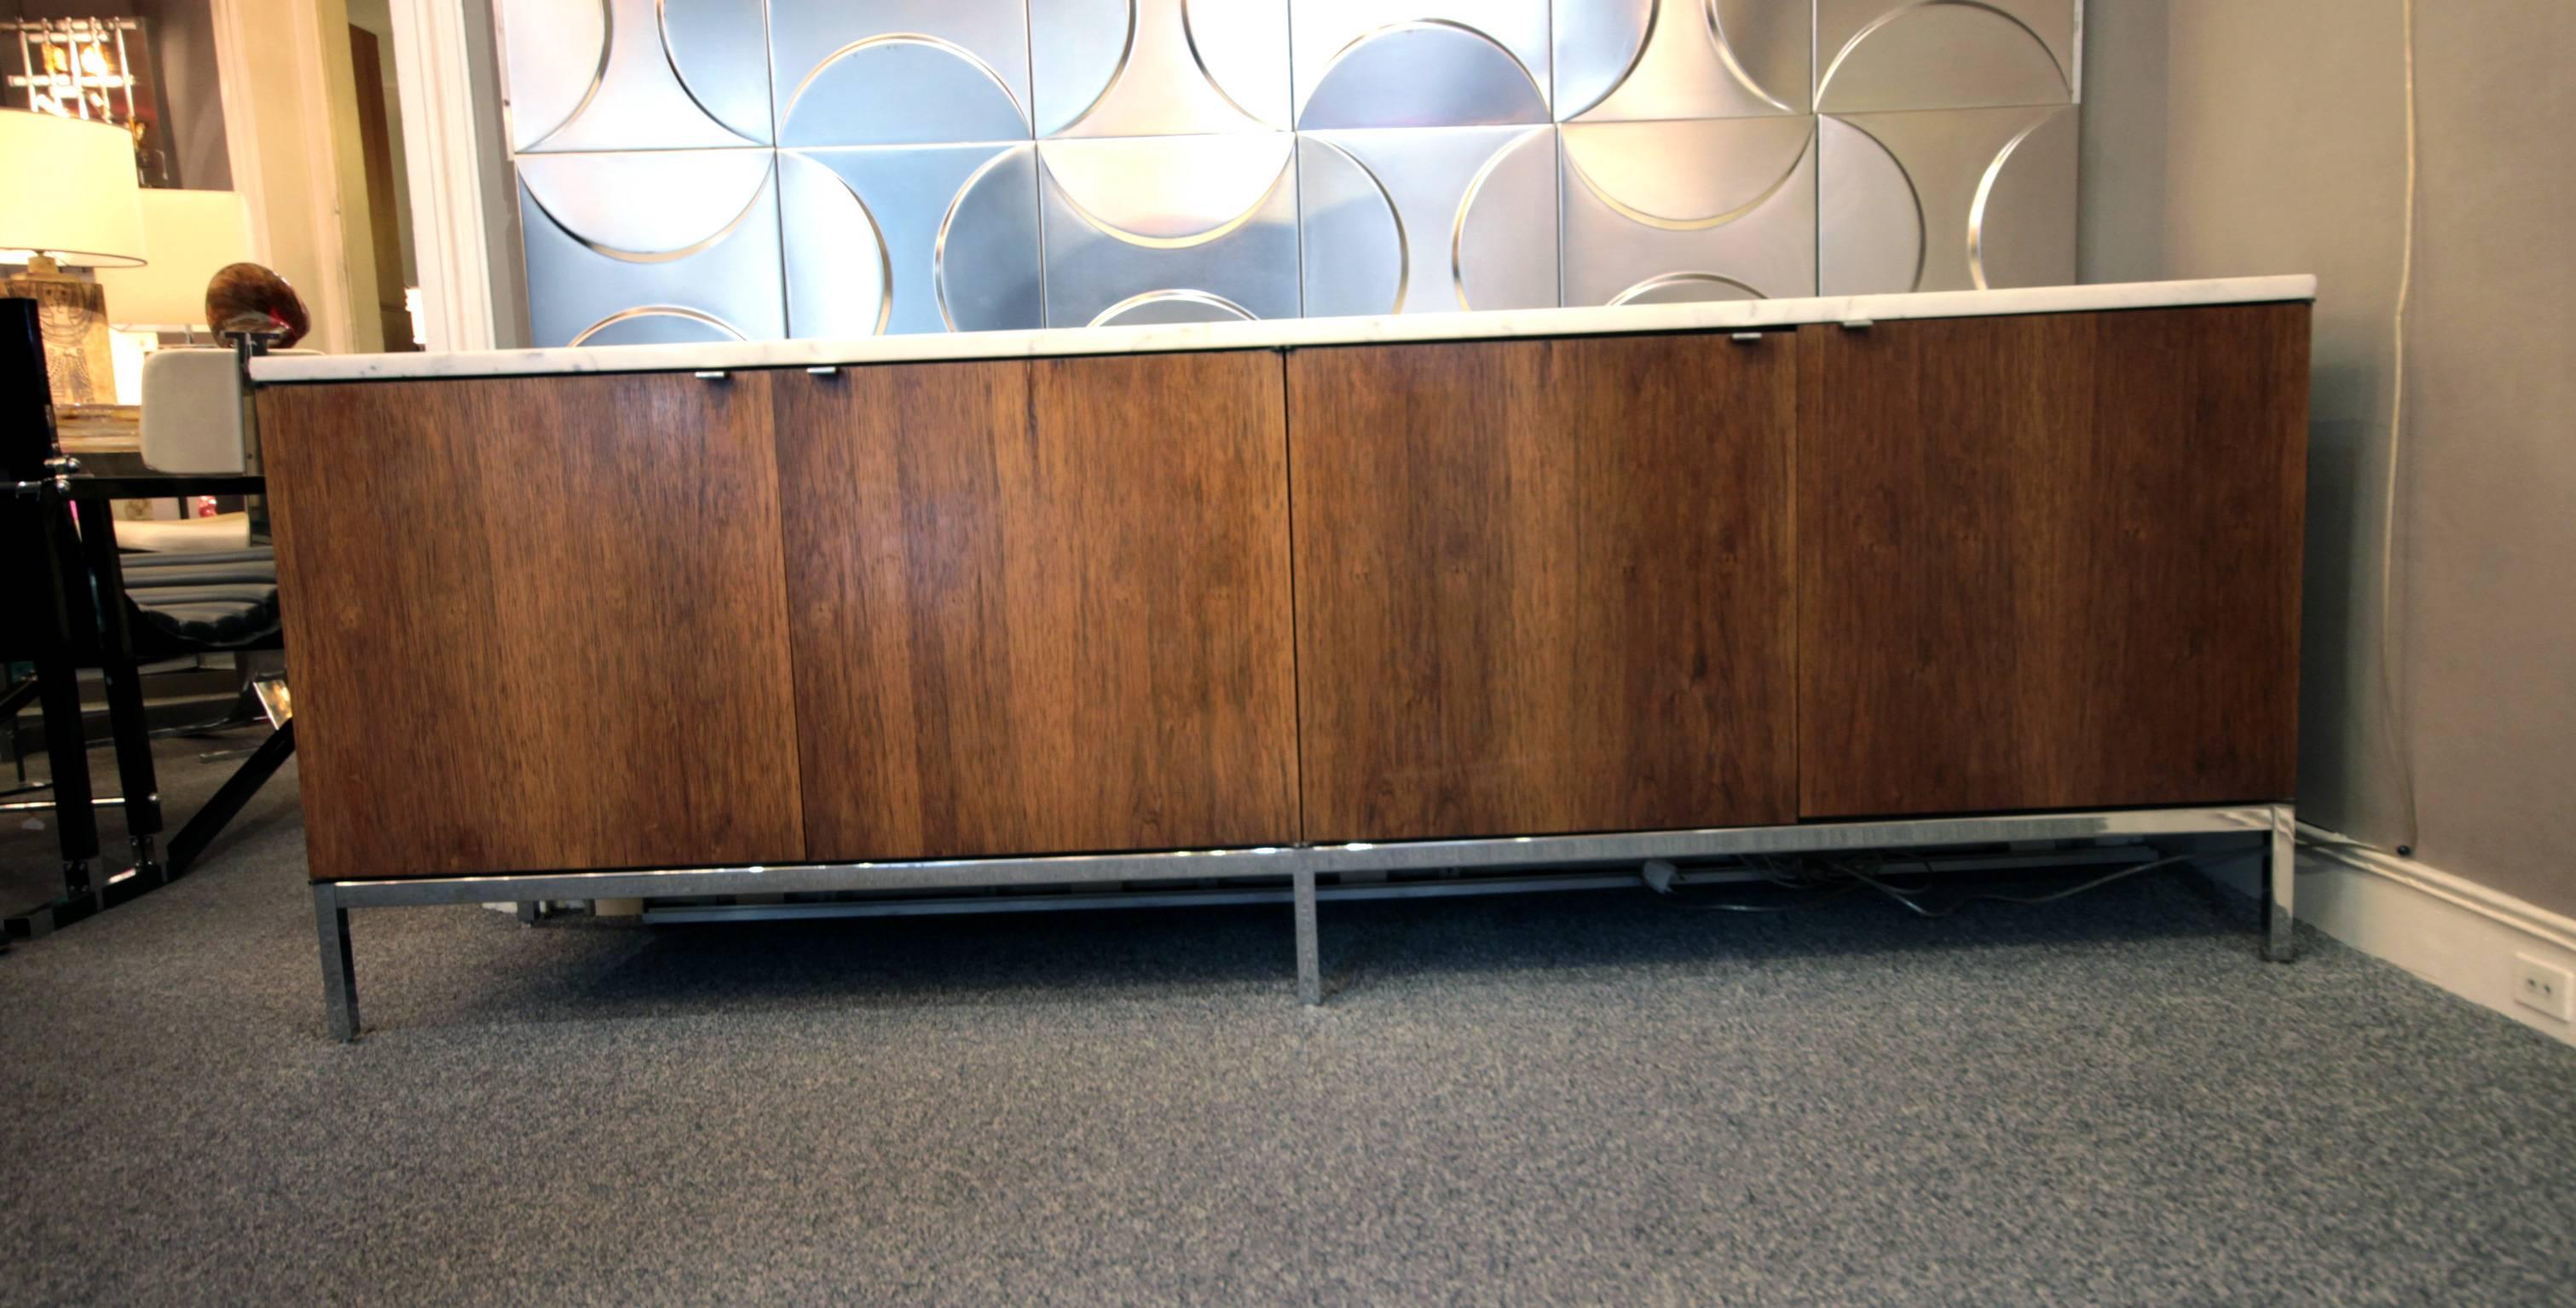 Large credenza in wallnut with chromed base and handles, designed by Florence Knoll for Knoll International. Four doors.
Interior and shelves in natural oak. Small hooves with adjustable height.
All in good original condition.